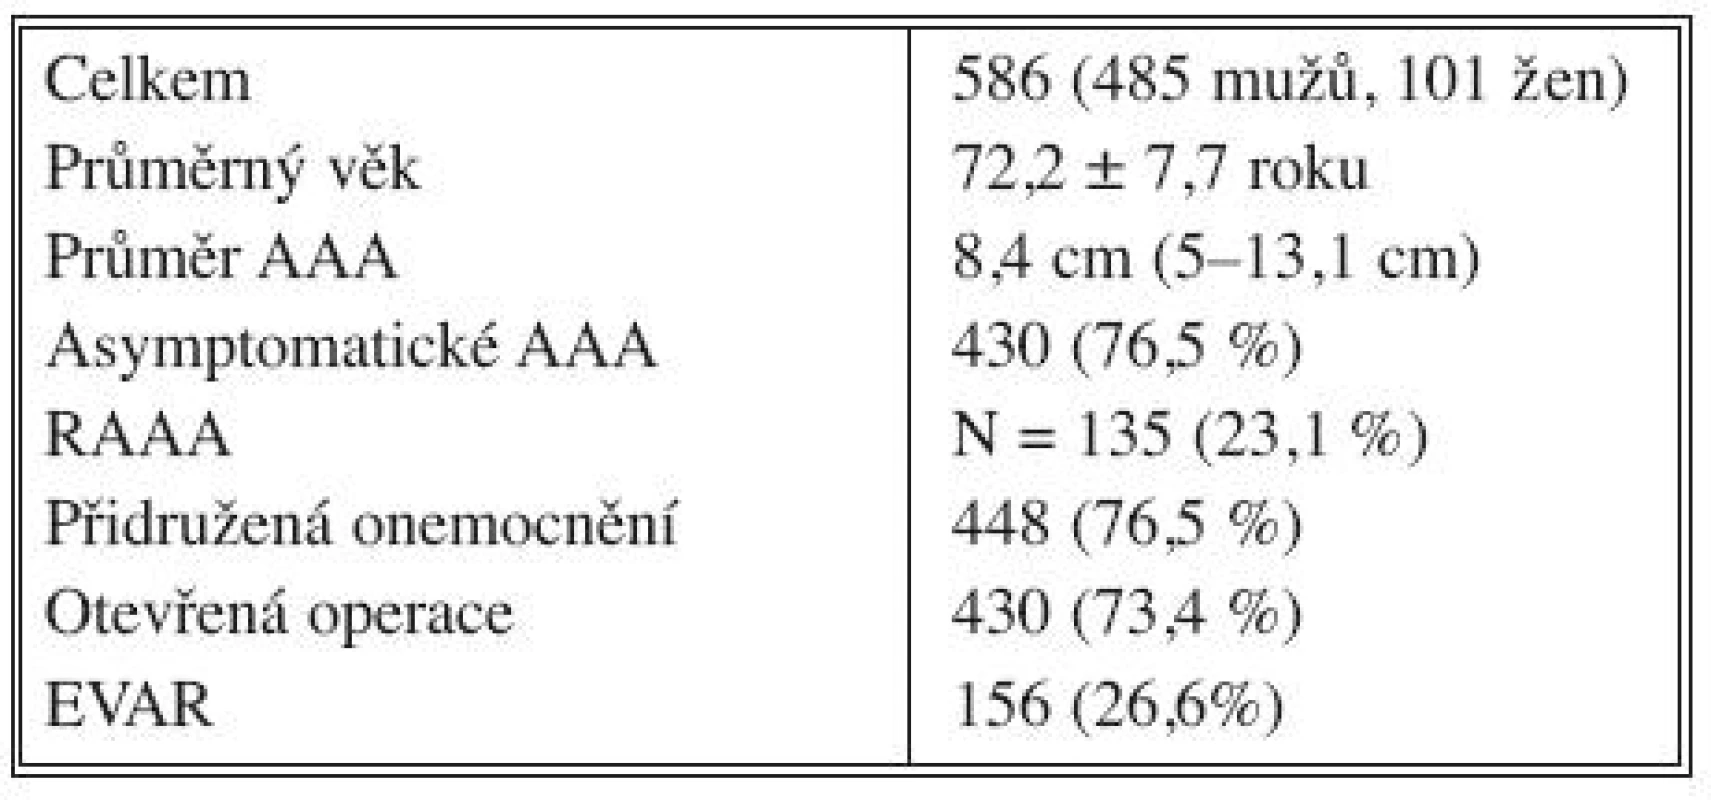 Skupina nemocných s AAA (2000–2009)
Tab. 1. Patient group with abdominal aortic aneurysms